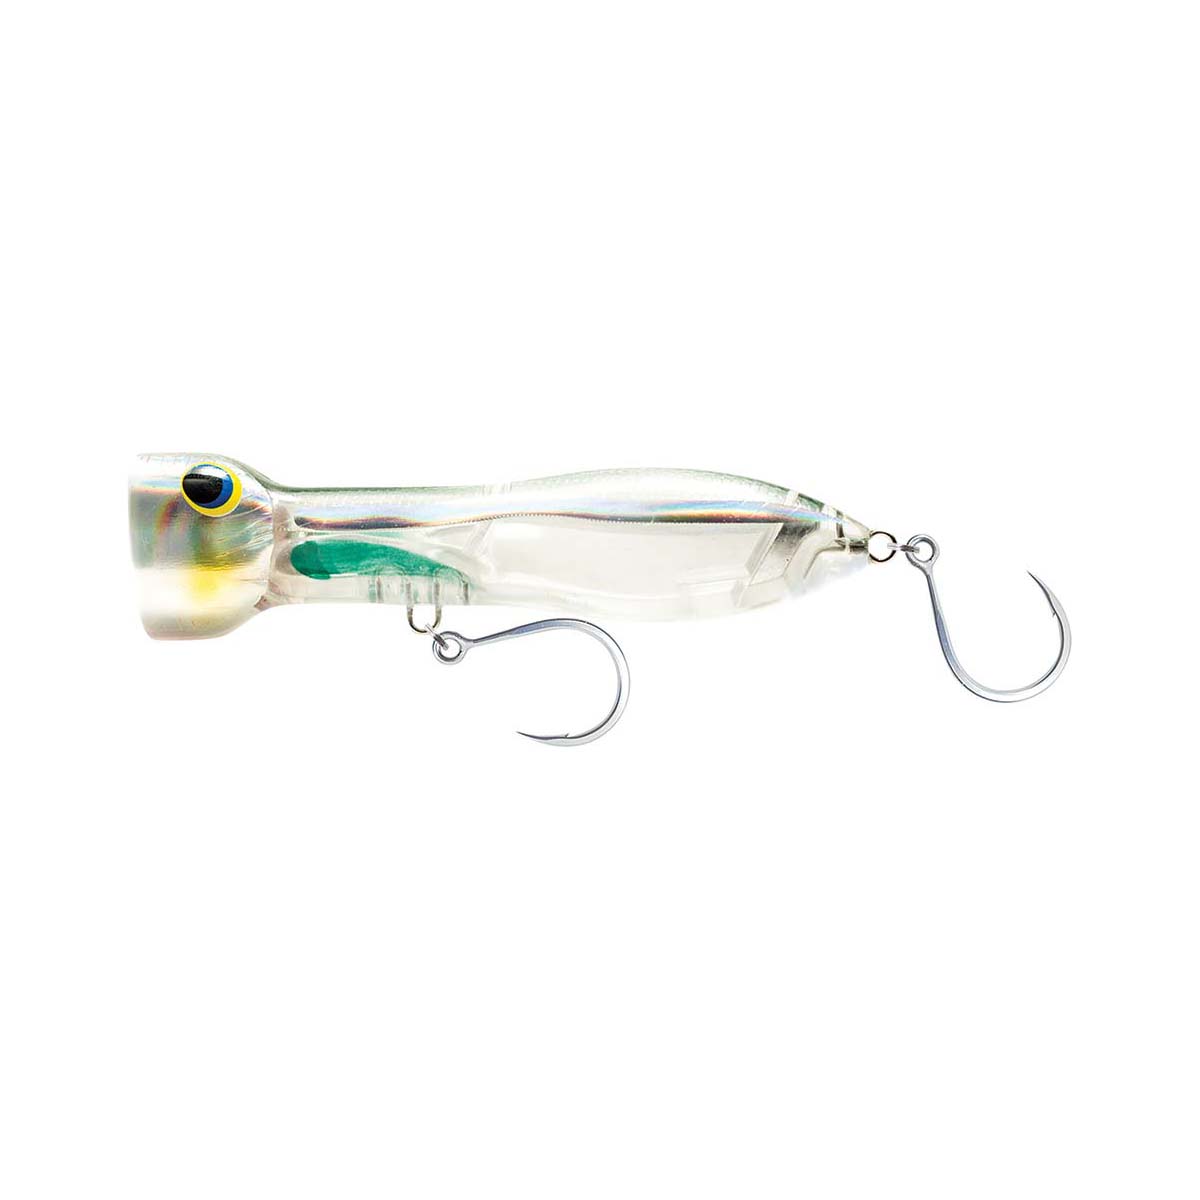 Nomad Chug Norris Surface Popper Lure 15cm Holo Ghost Shad